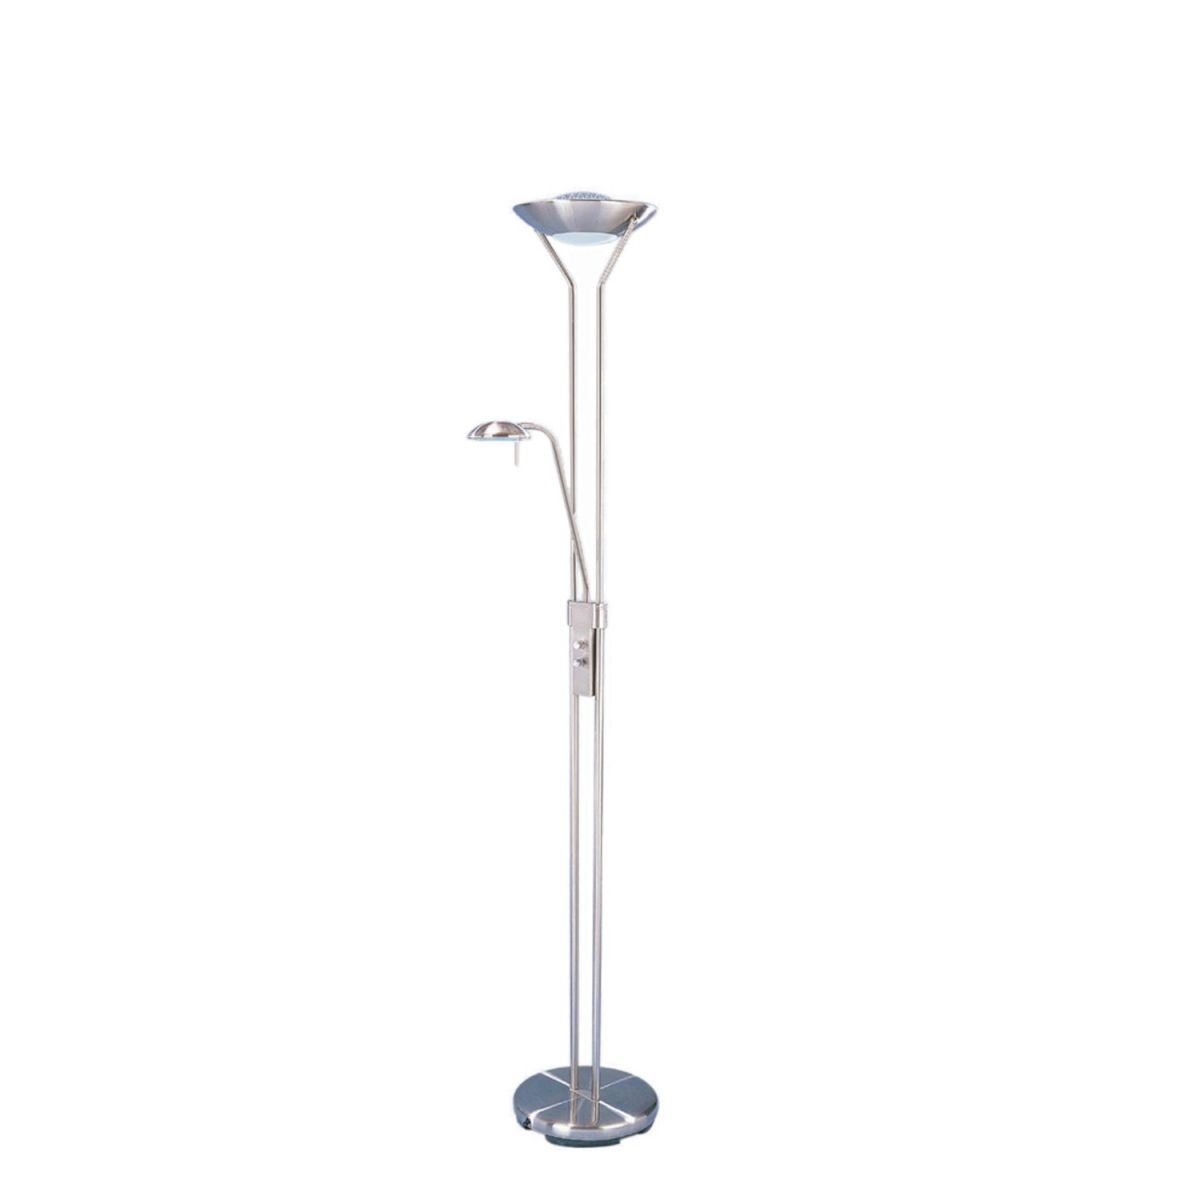 Duality Ii Floor Lamp intended for size 1200 X 1200